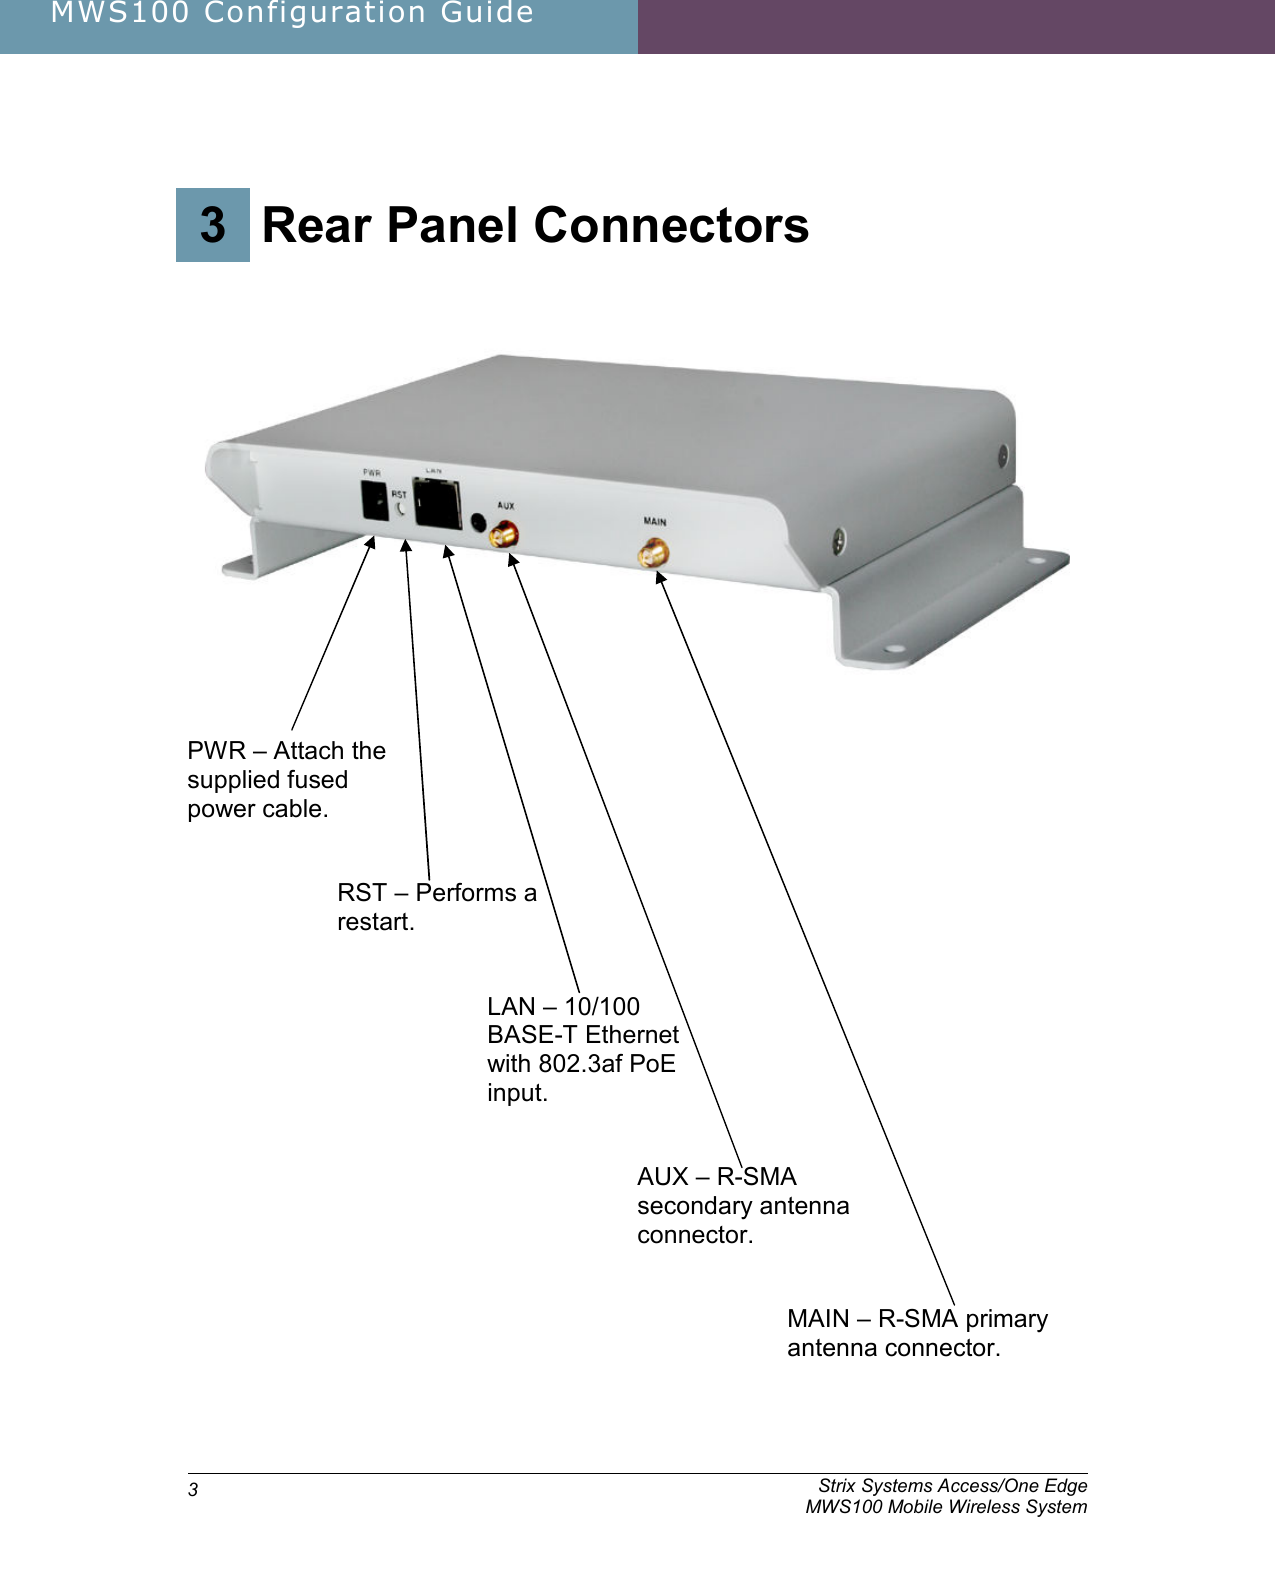 MWS100 Configuration Guide               Strix Systems Access/One Edge     MWS100 Mobile Wireless System 33.  Rear Panel Connectors 3 Rear Panel Connectors       PWR – Attach the supplied fused power cable. RST – Performs a restart. LAN – 10/100 BASE-T Ethernet with 802.3af PoE input. AUX – R-SMA secondary antenna connector. MAIN – R-SMA primary antenna connector. 